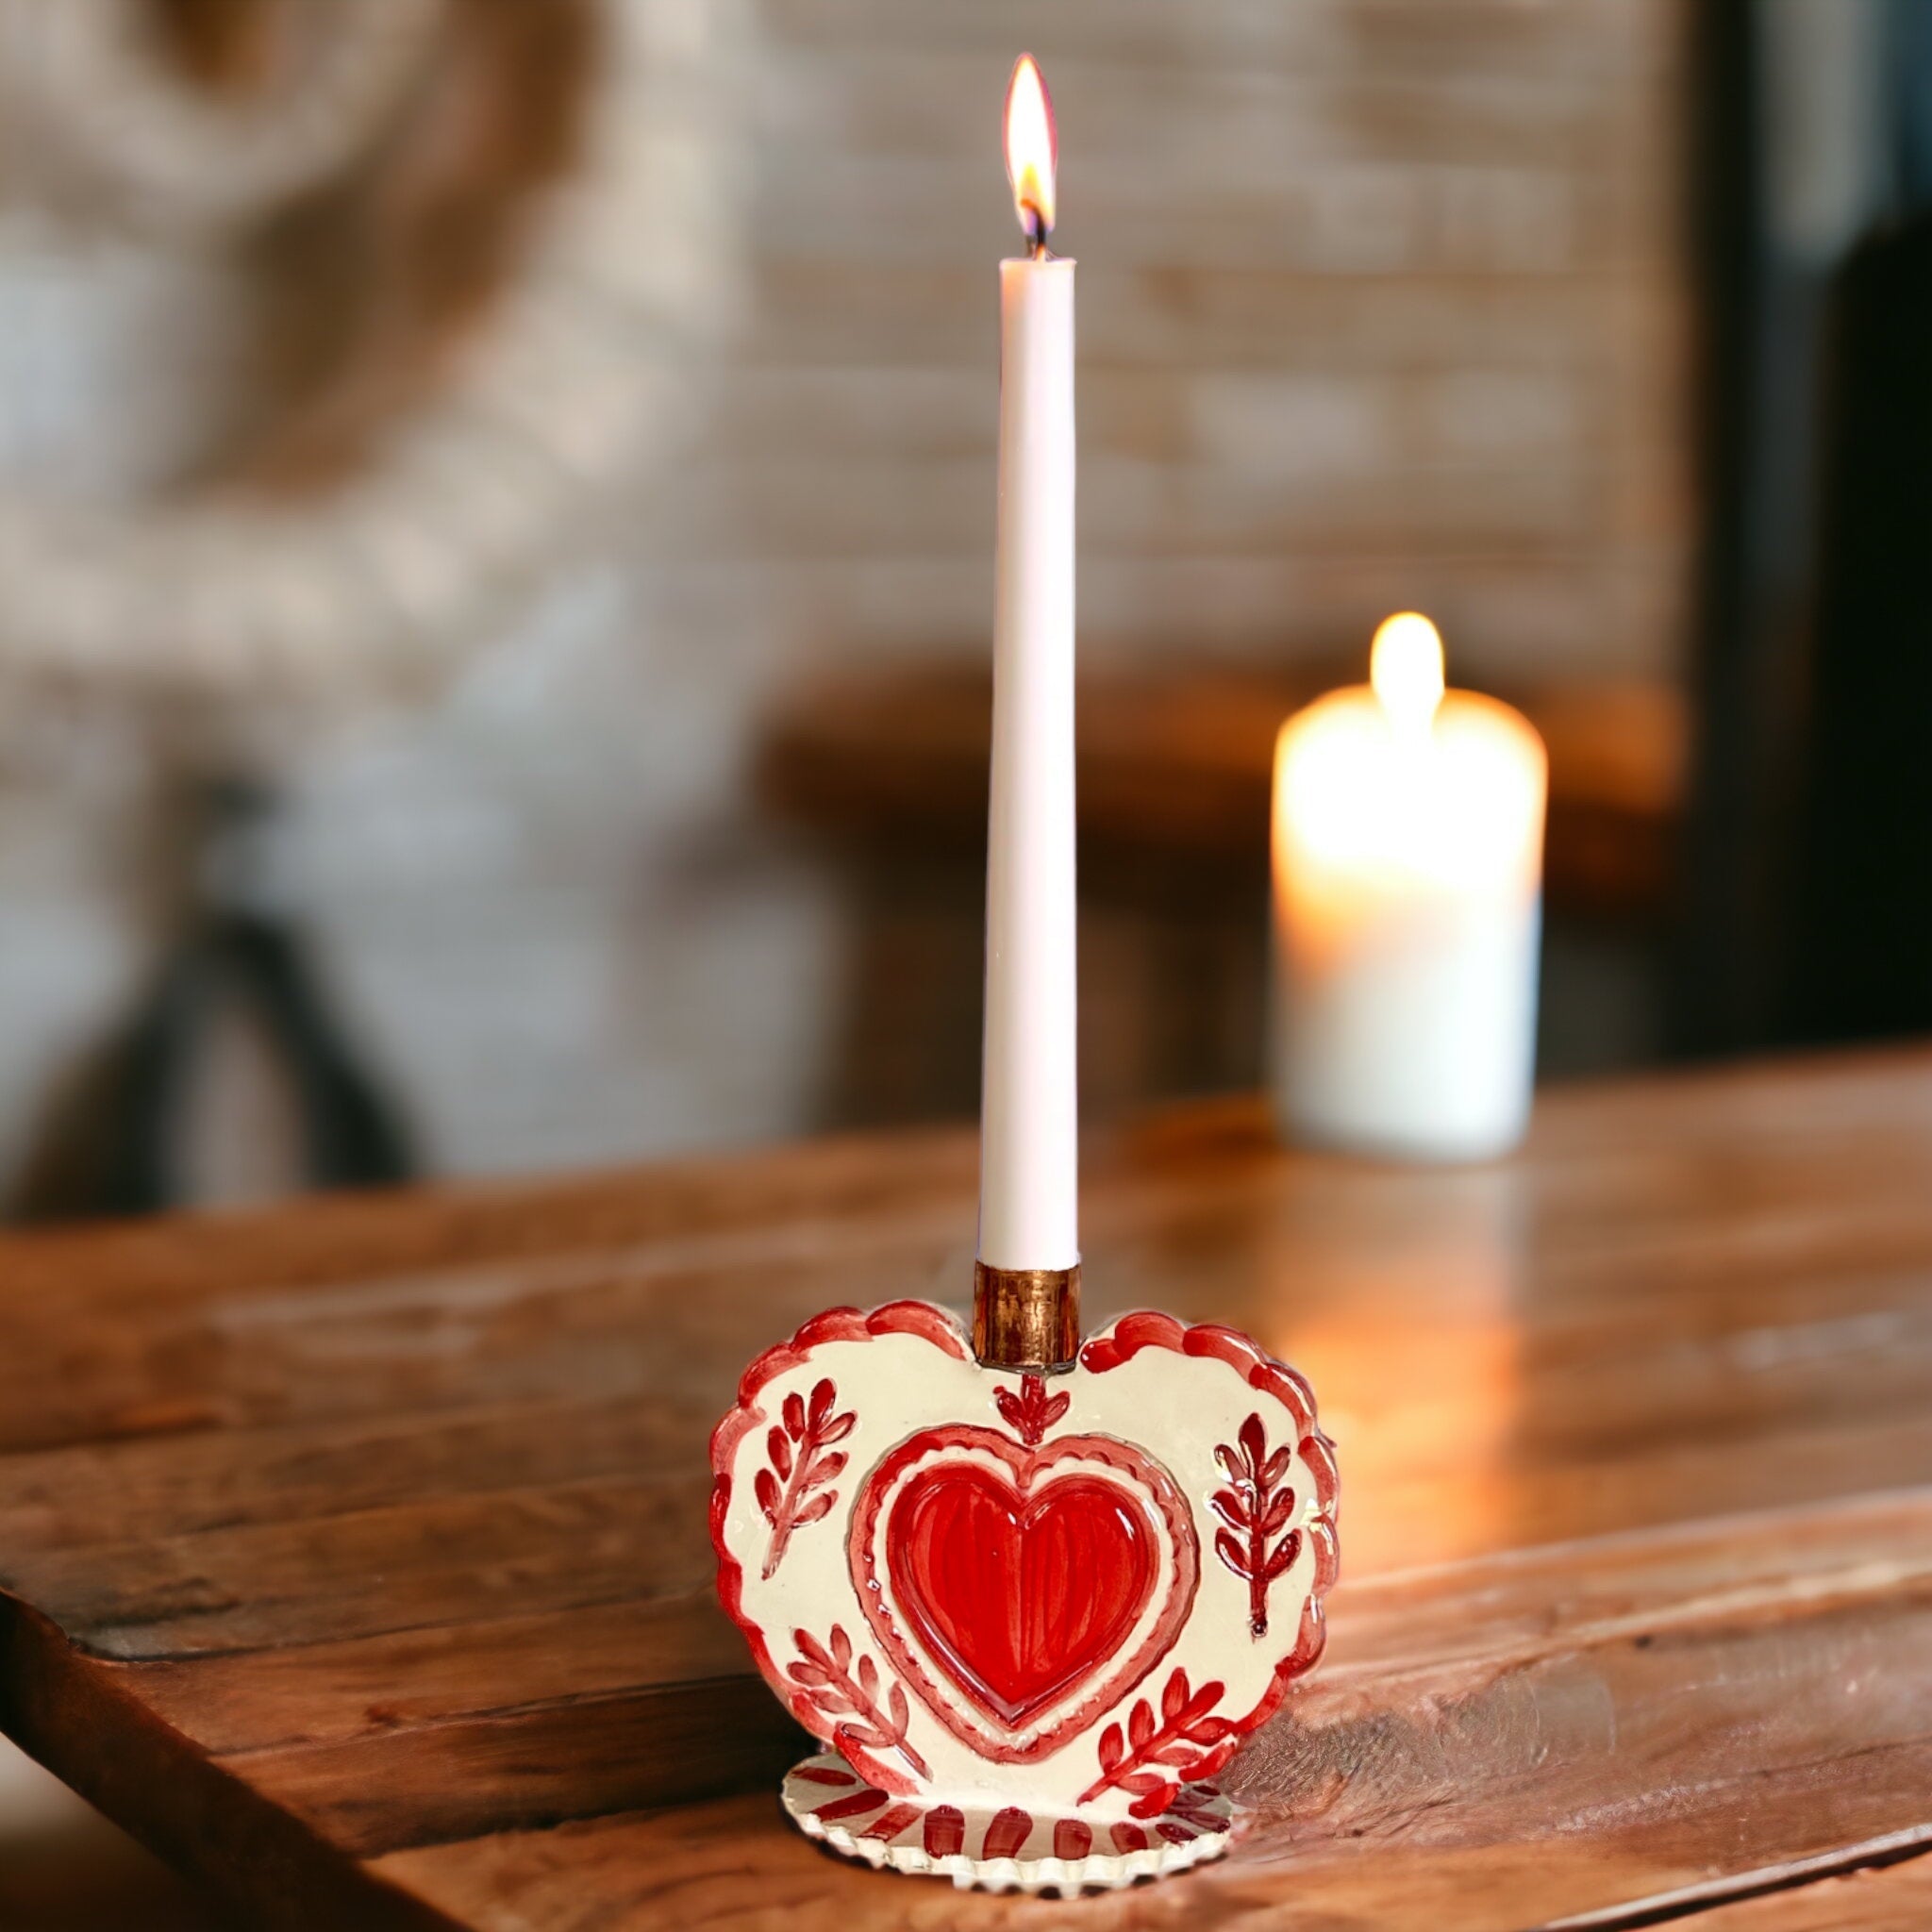 Heart Candlestick Holder - Premium Cake Topper from Tricia Lowenfield Design 